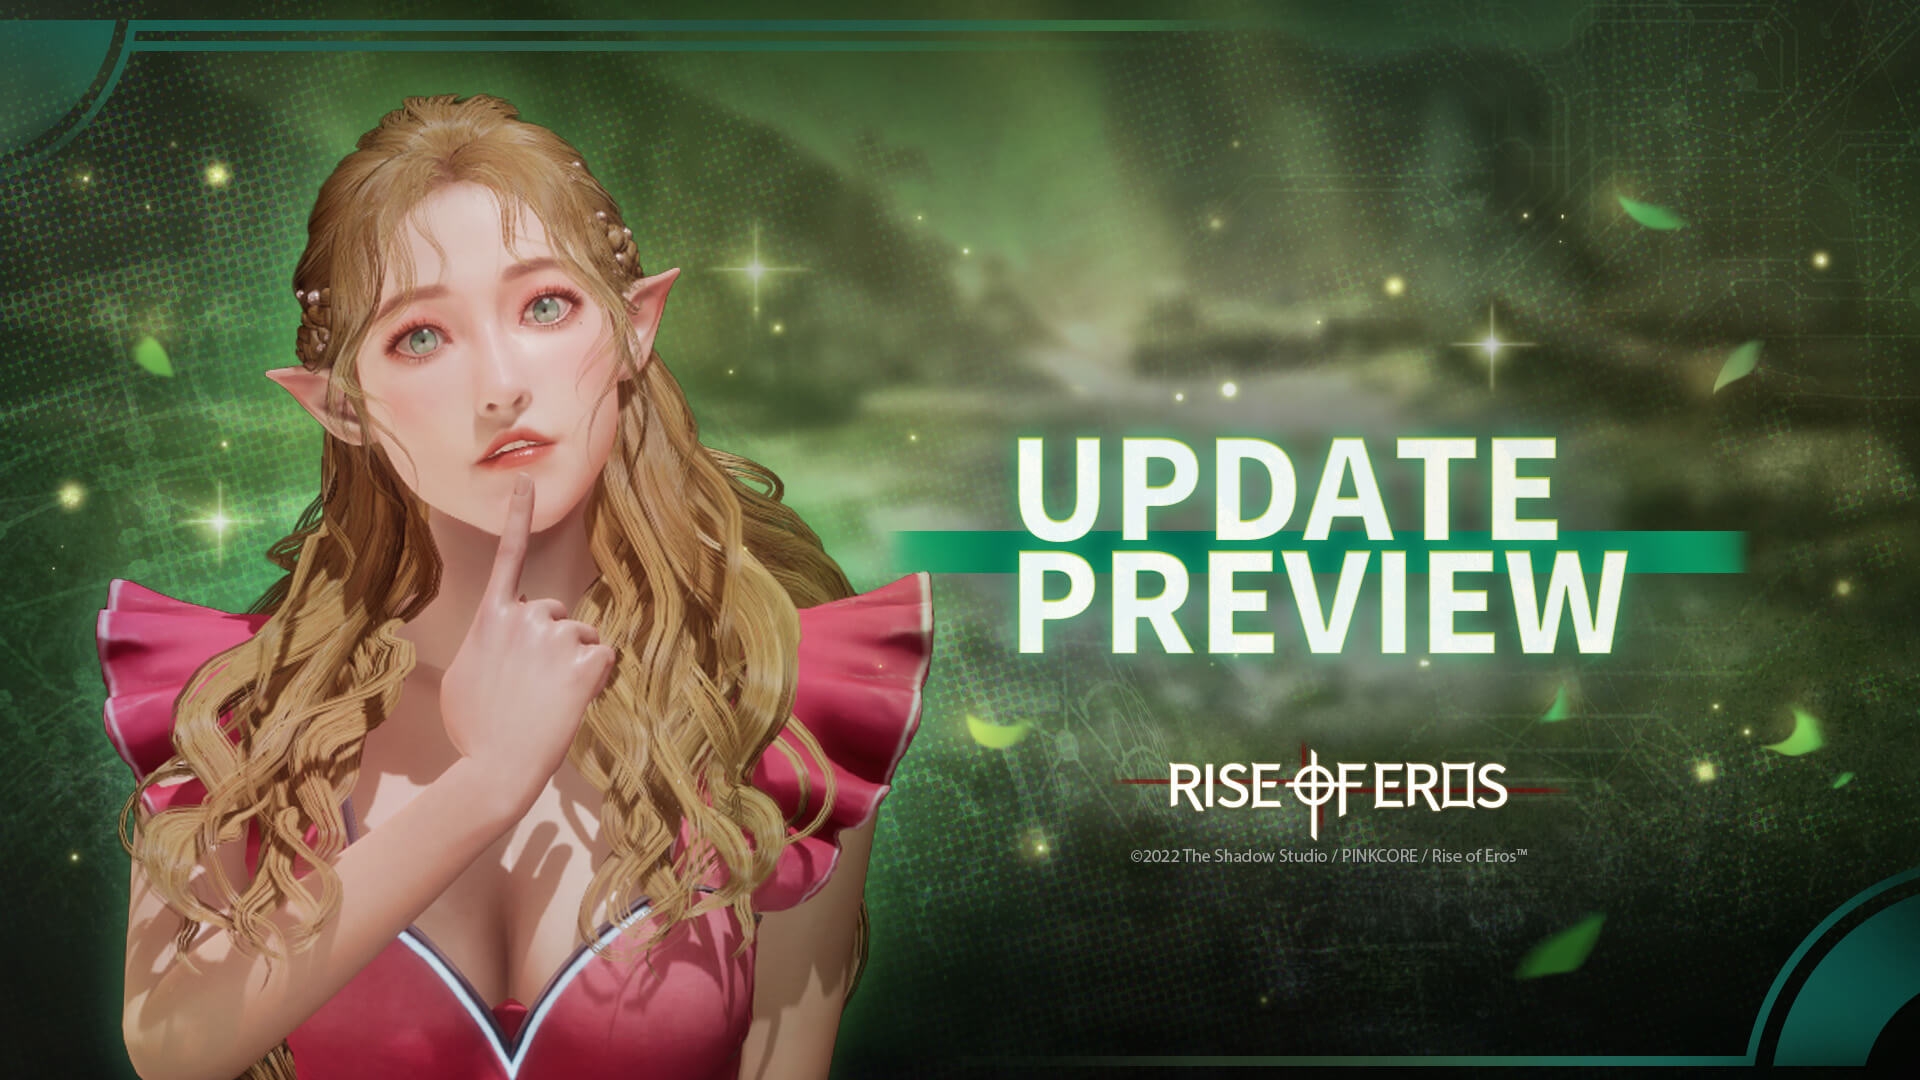 09.27 Update Preview